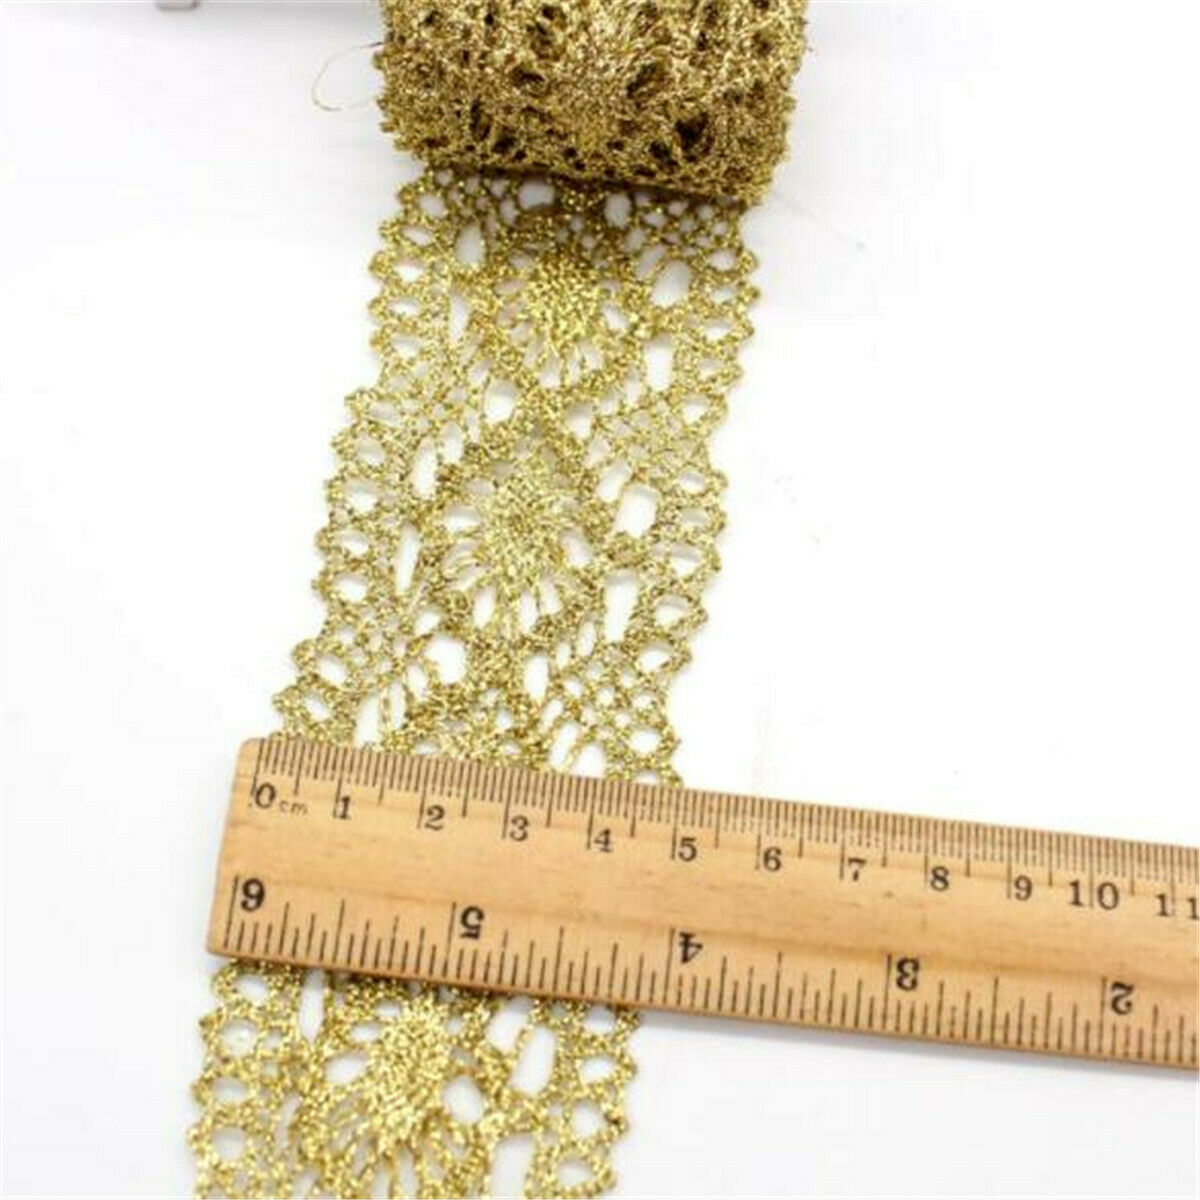 1 Yard Golden Lace Trim Embroidery Wedding Applique Dress Sewing Craft